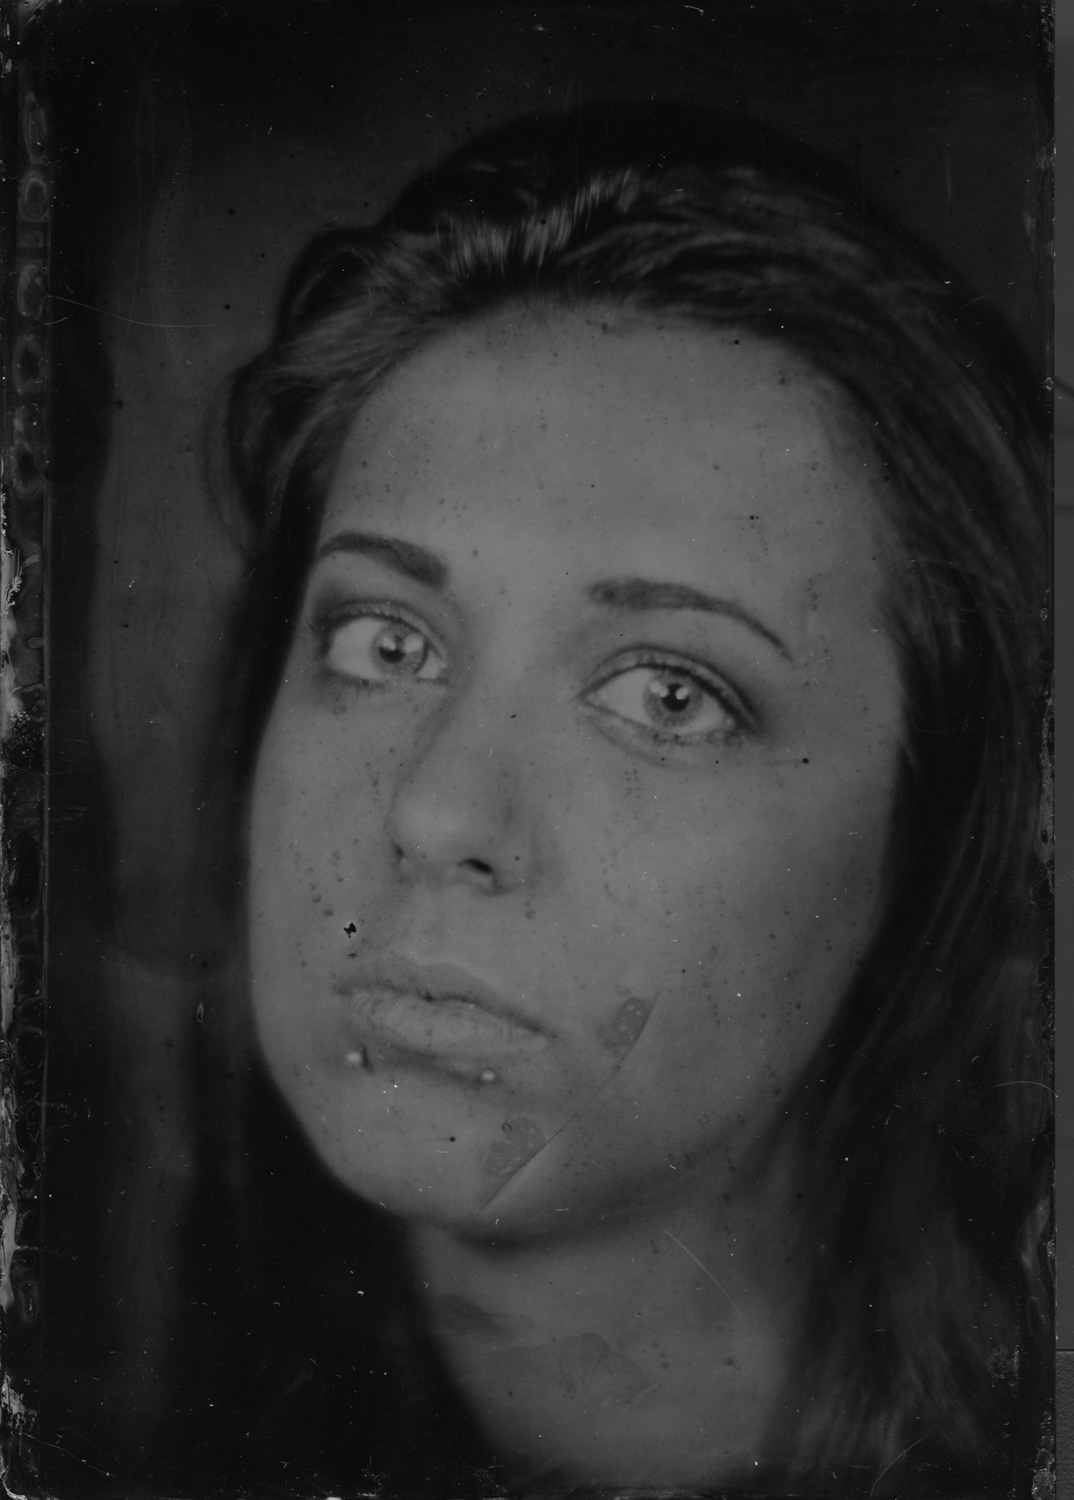 wet plate collodion tintype 5x7 large format